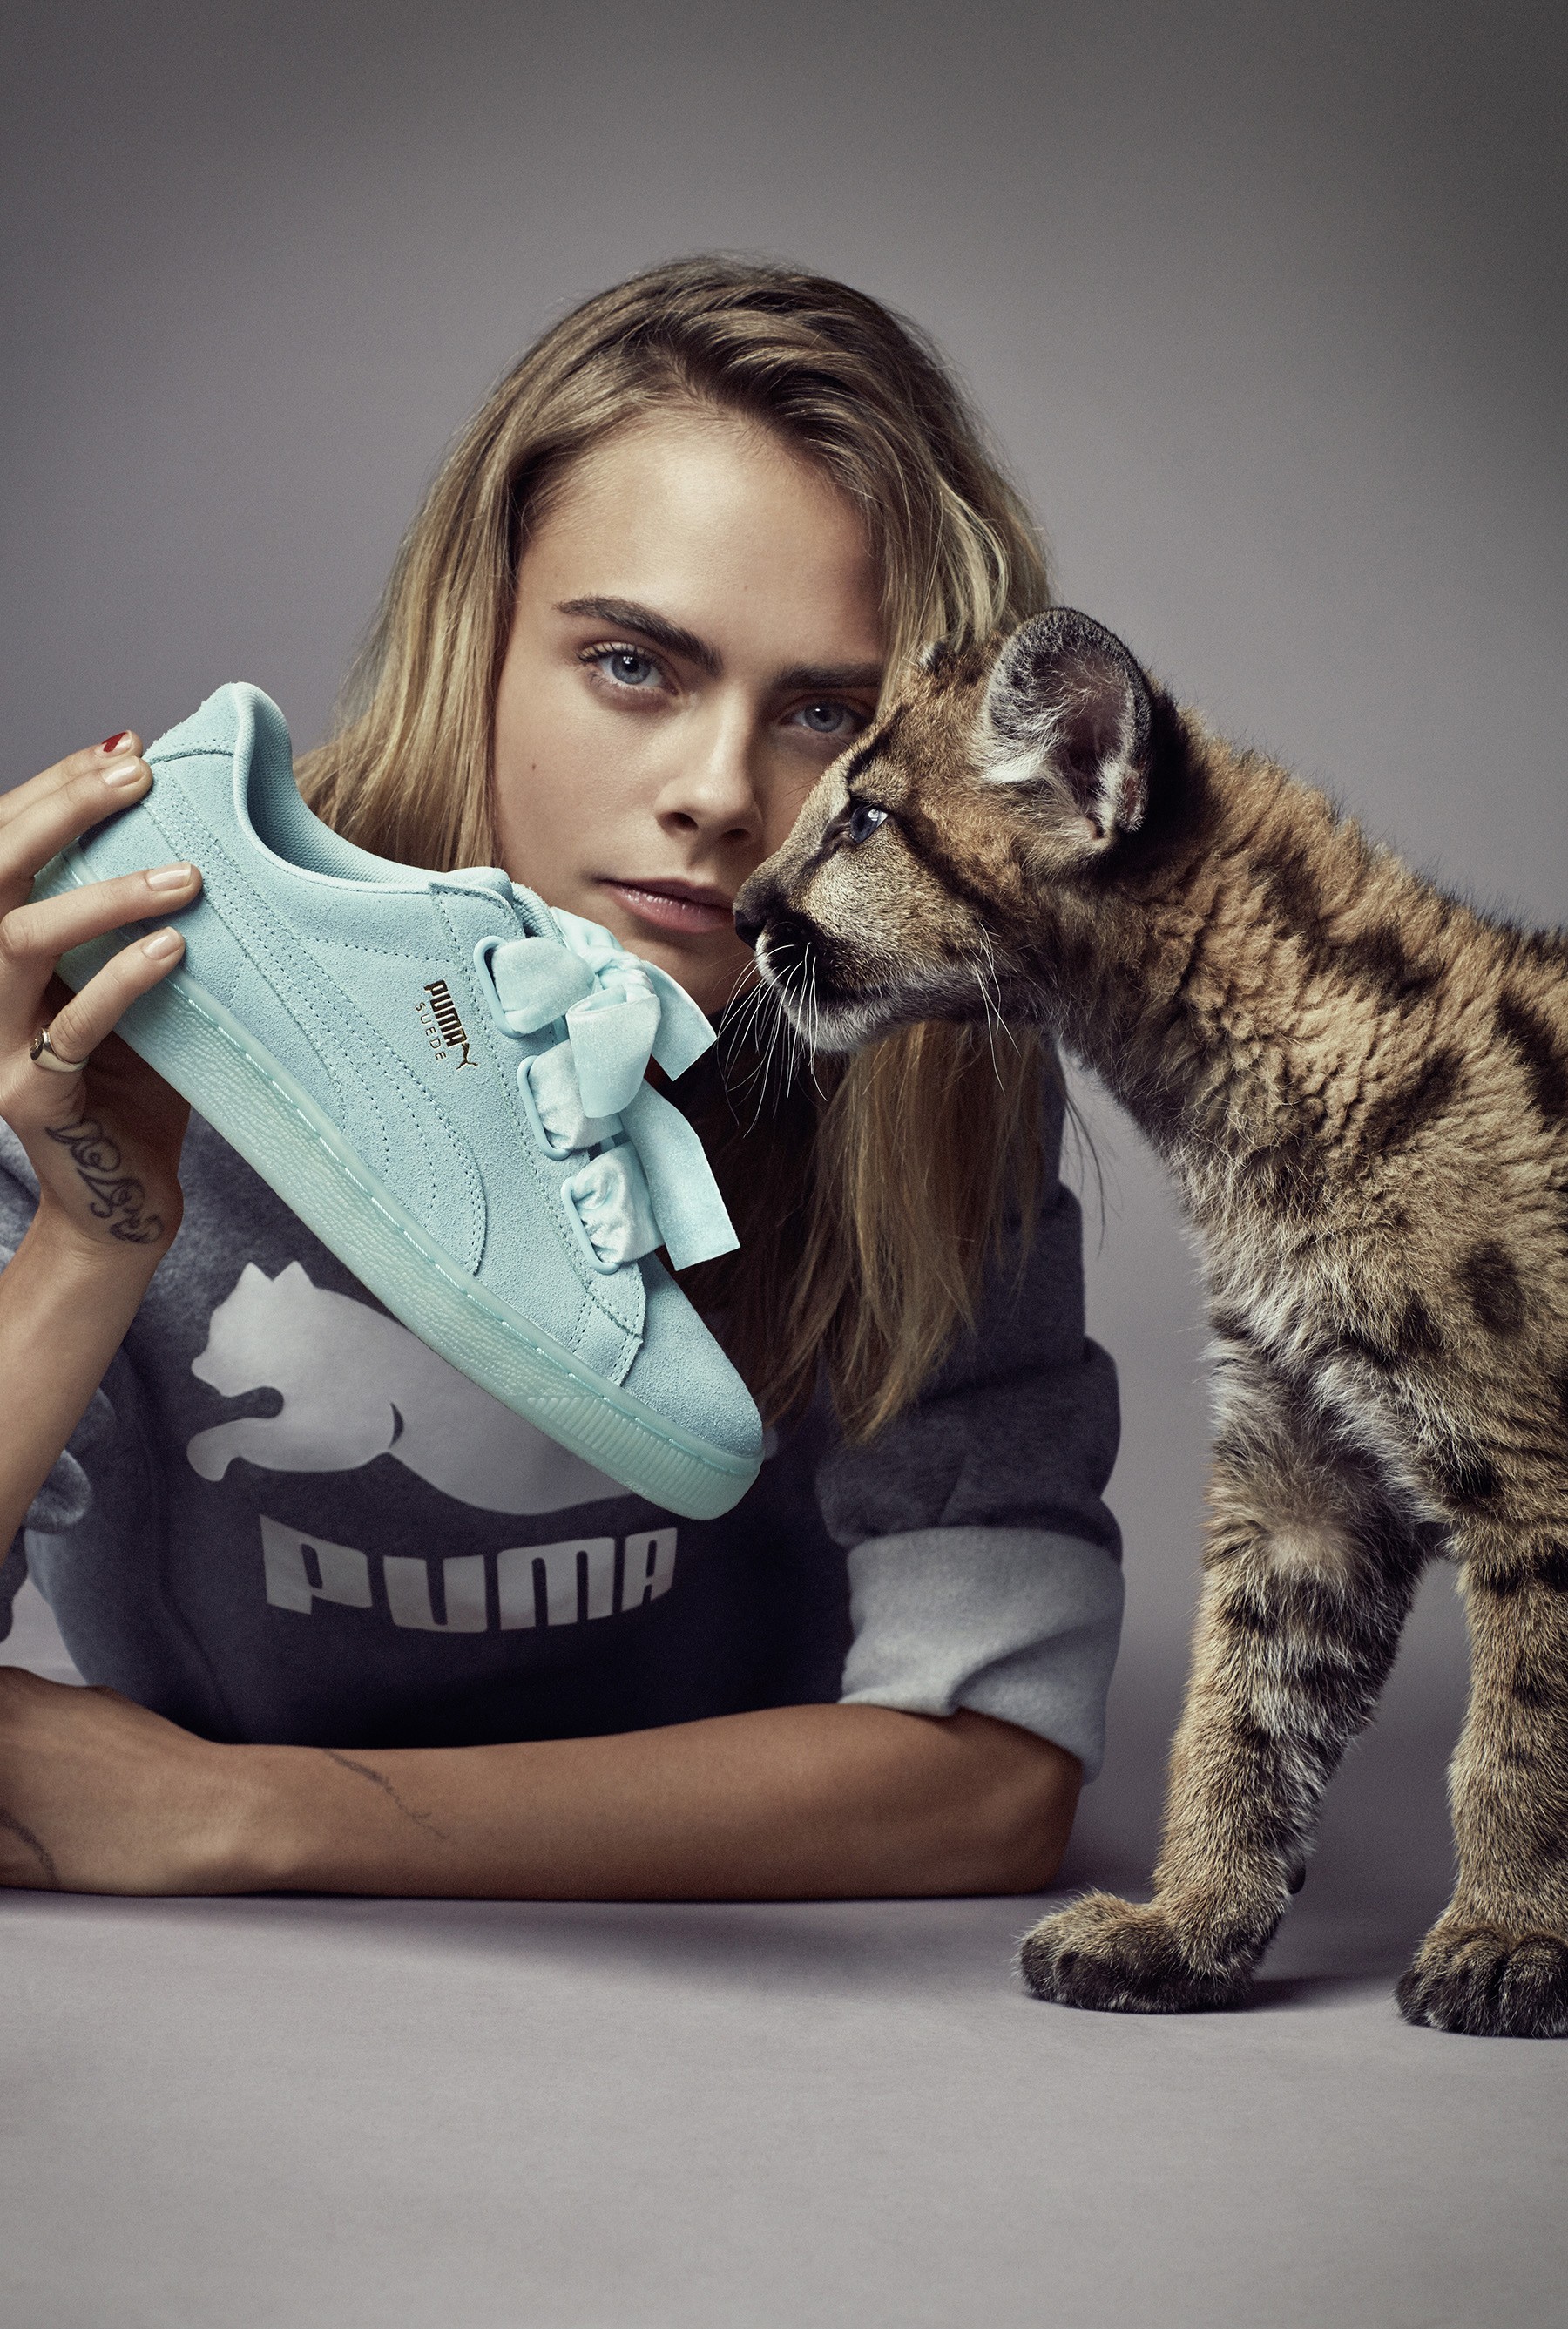 Cara Delevingne Women Model Actress Pumas Sneakers Animals Shoes Tattoo Blonde 1800x2673